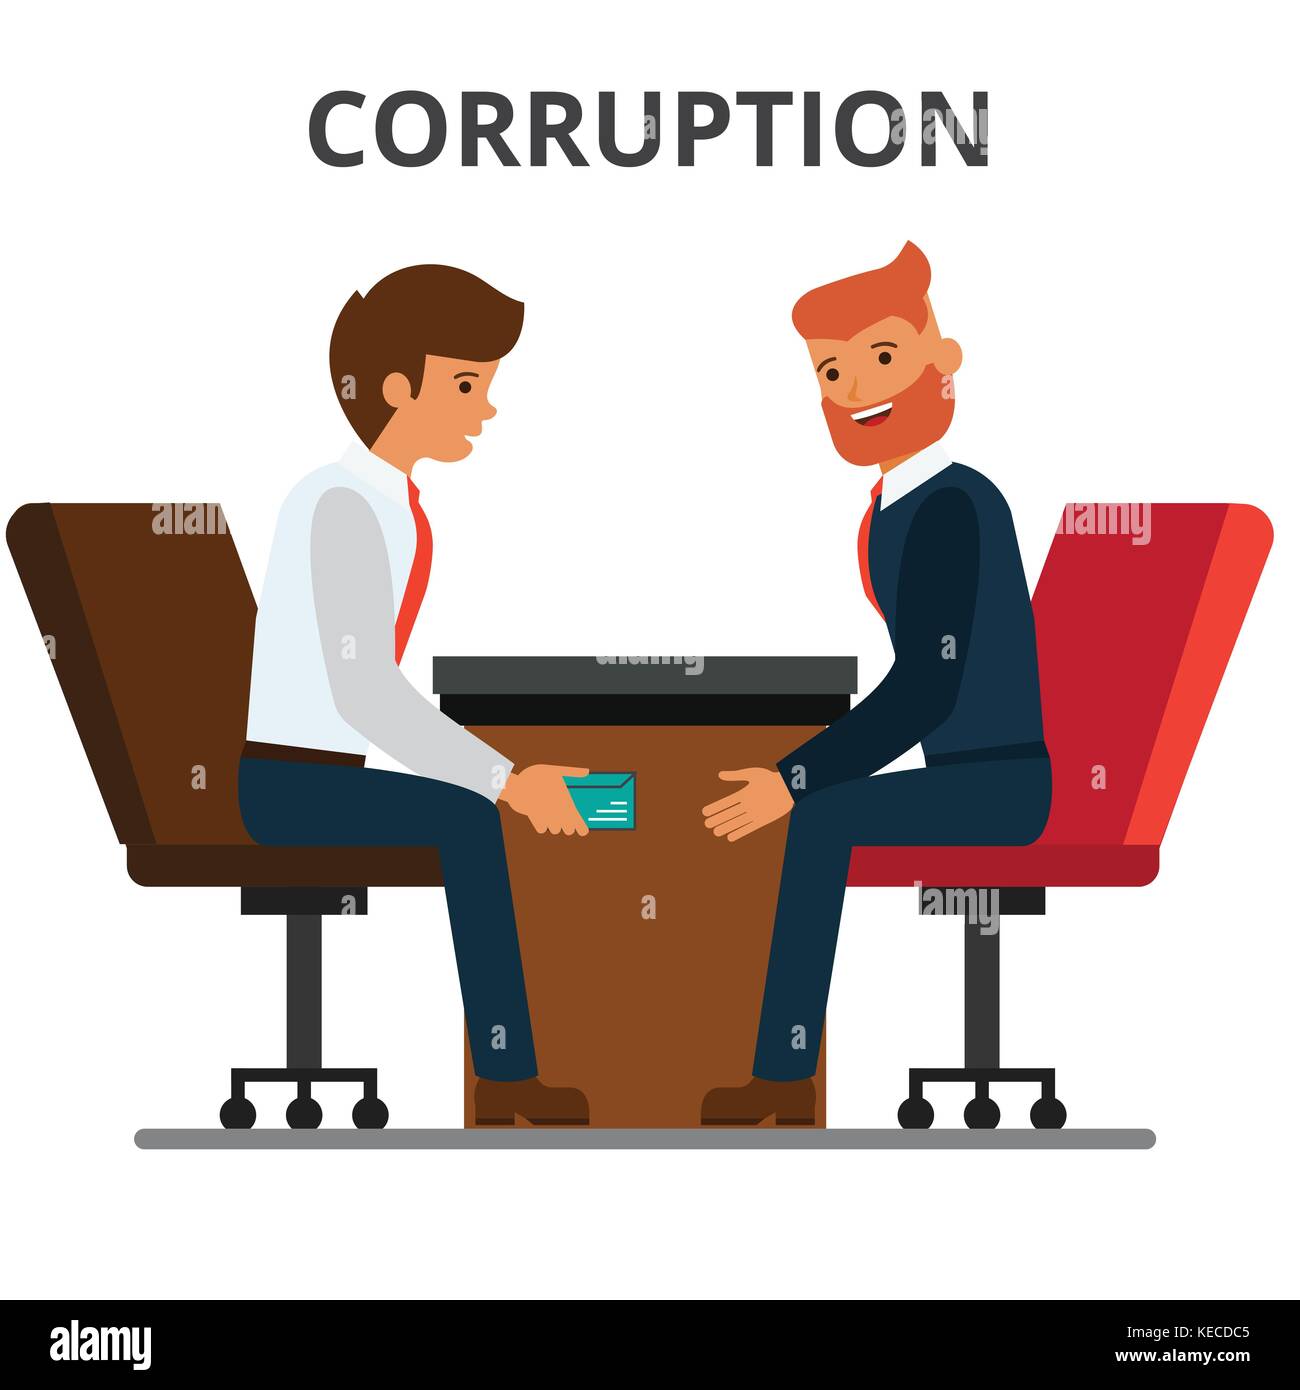 Corruption Illustration High Resolution Stock Photography and Images - Alamy